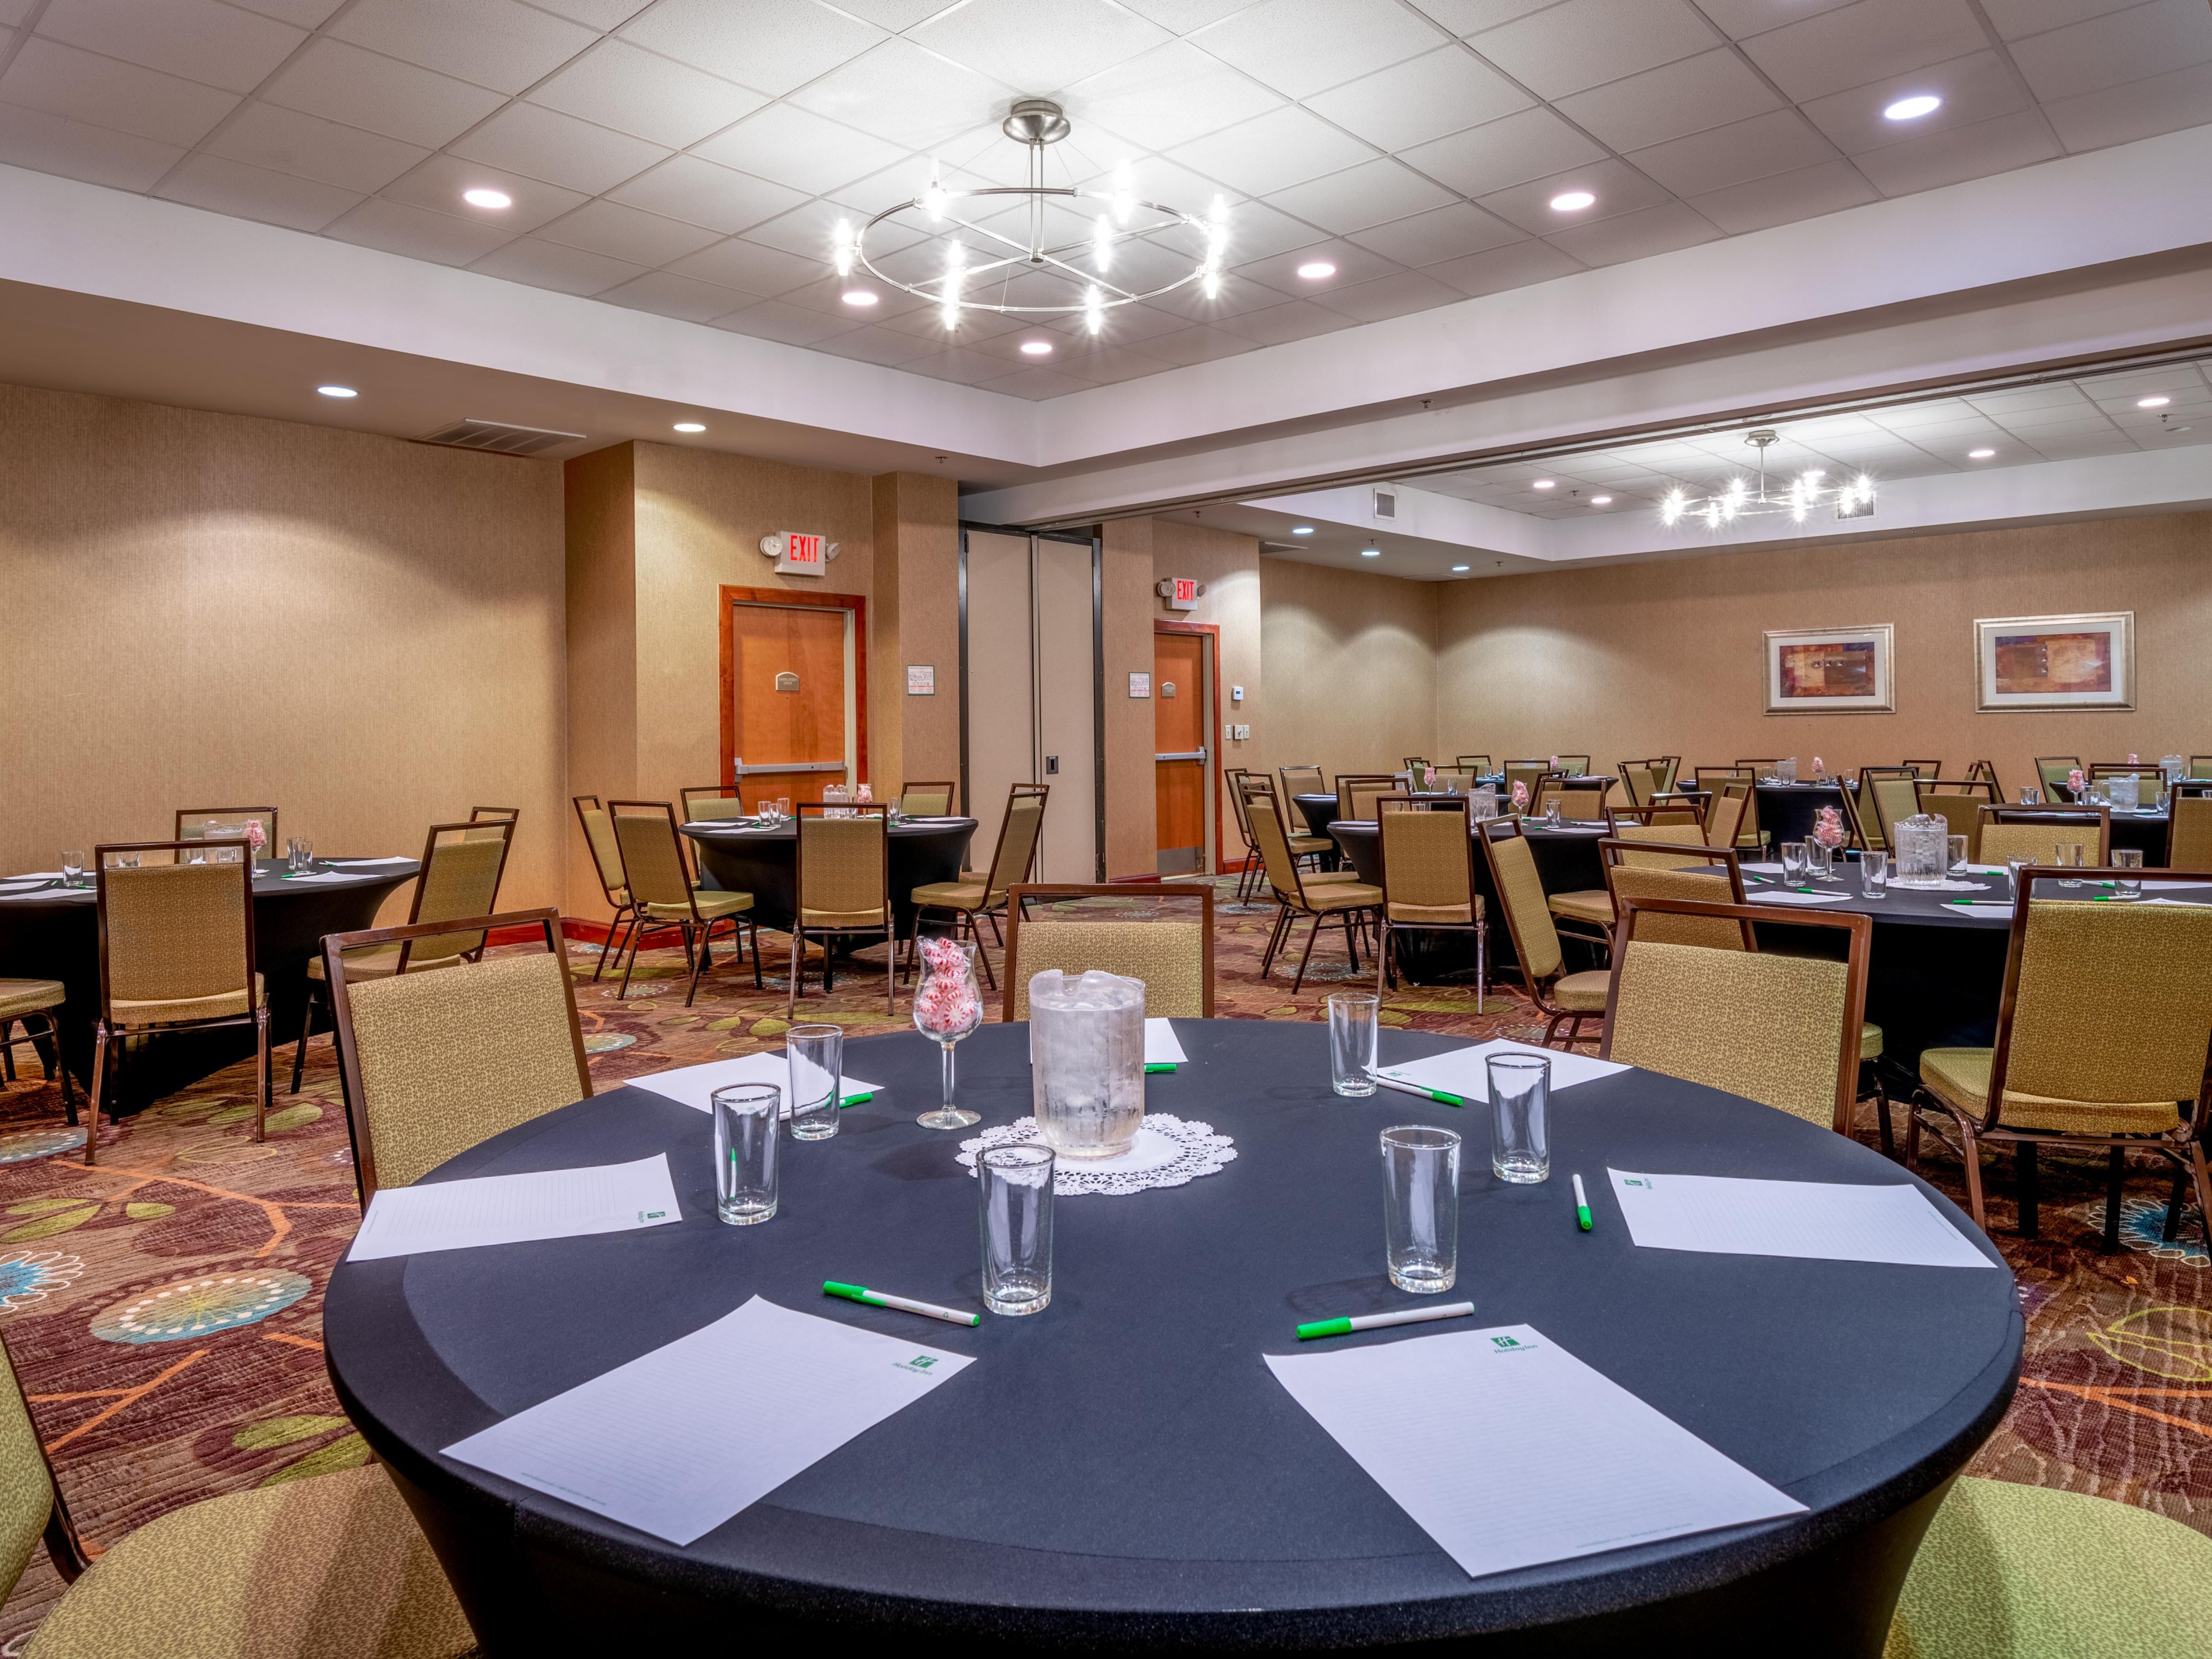 With 1700 square feet of flexible meeting space, featuring stylish decor and dynamic set-ups, our venue is ideal for meetings, banquets, and corporate events up to any size. Let our team of experienced meeting planners and creative culinary artists plan every detail for you, from coffee service to audio-visual equipment set-up.